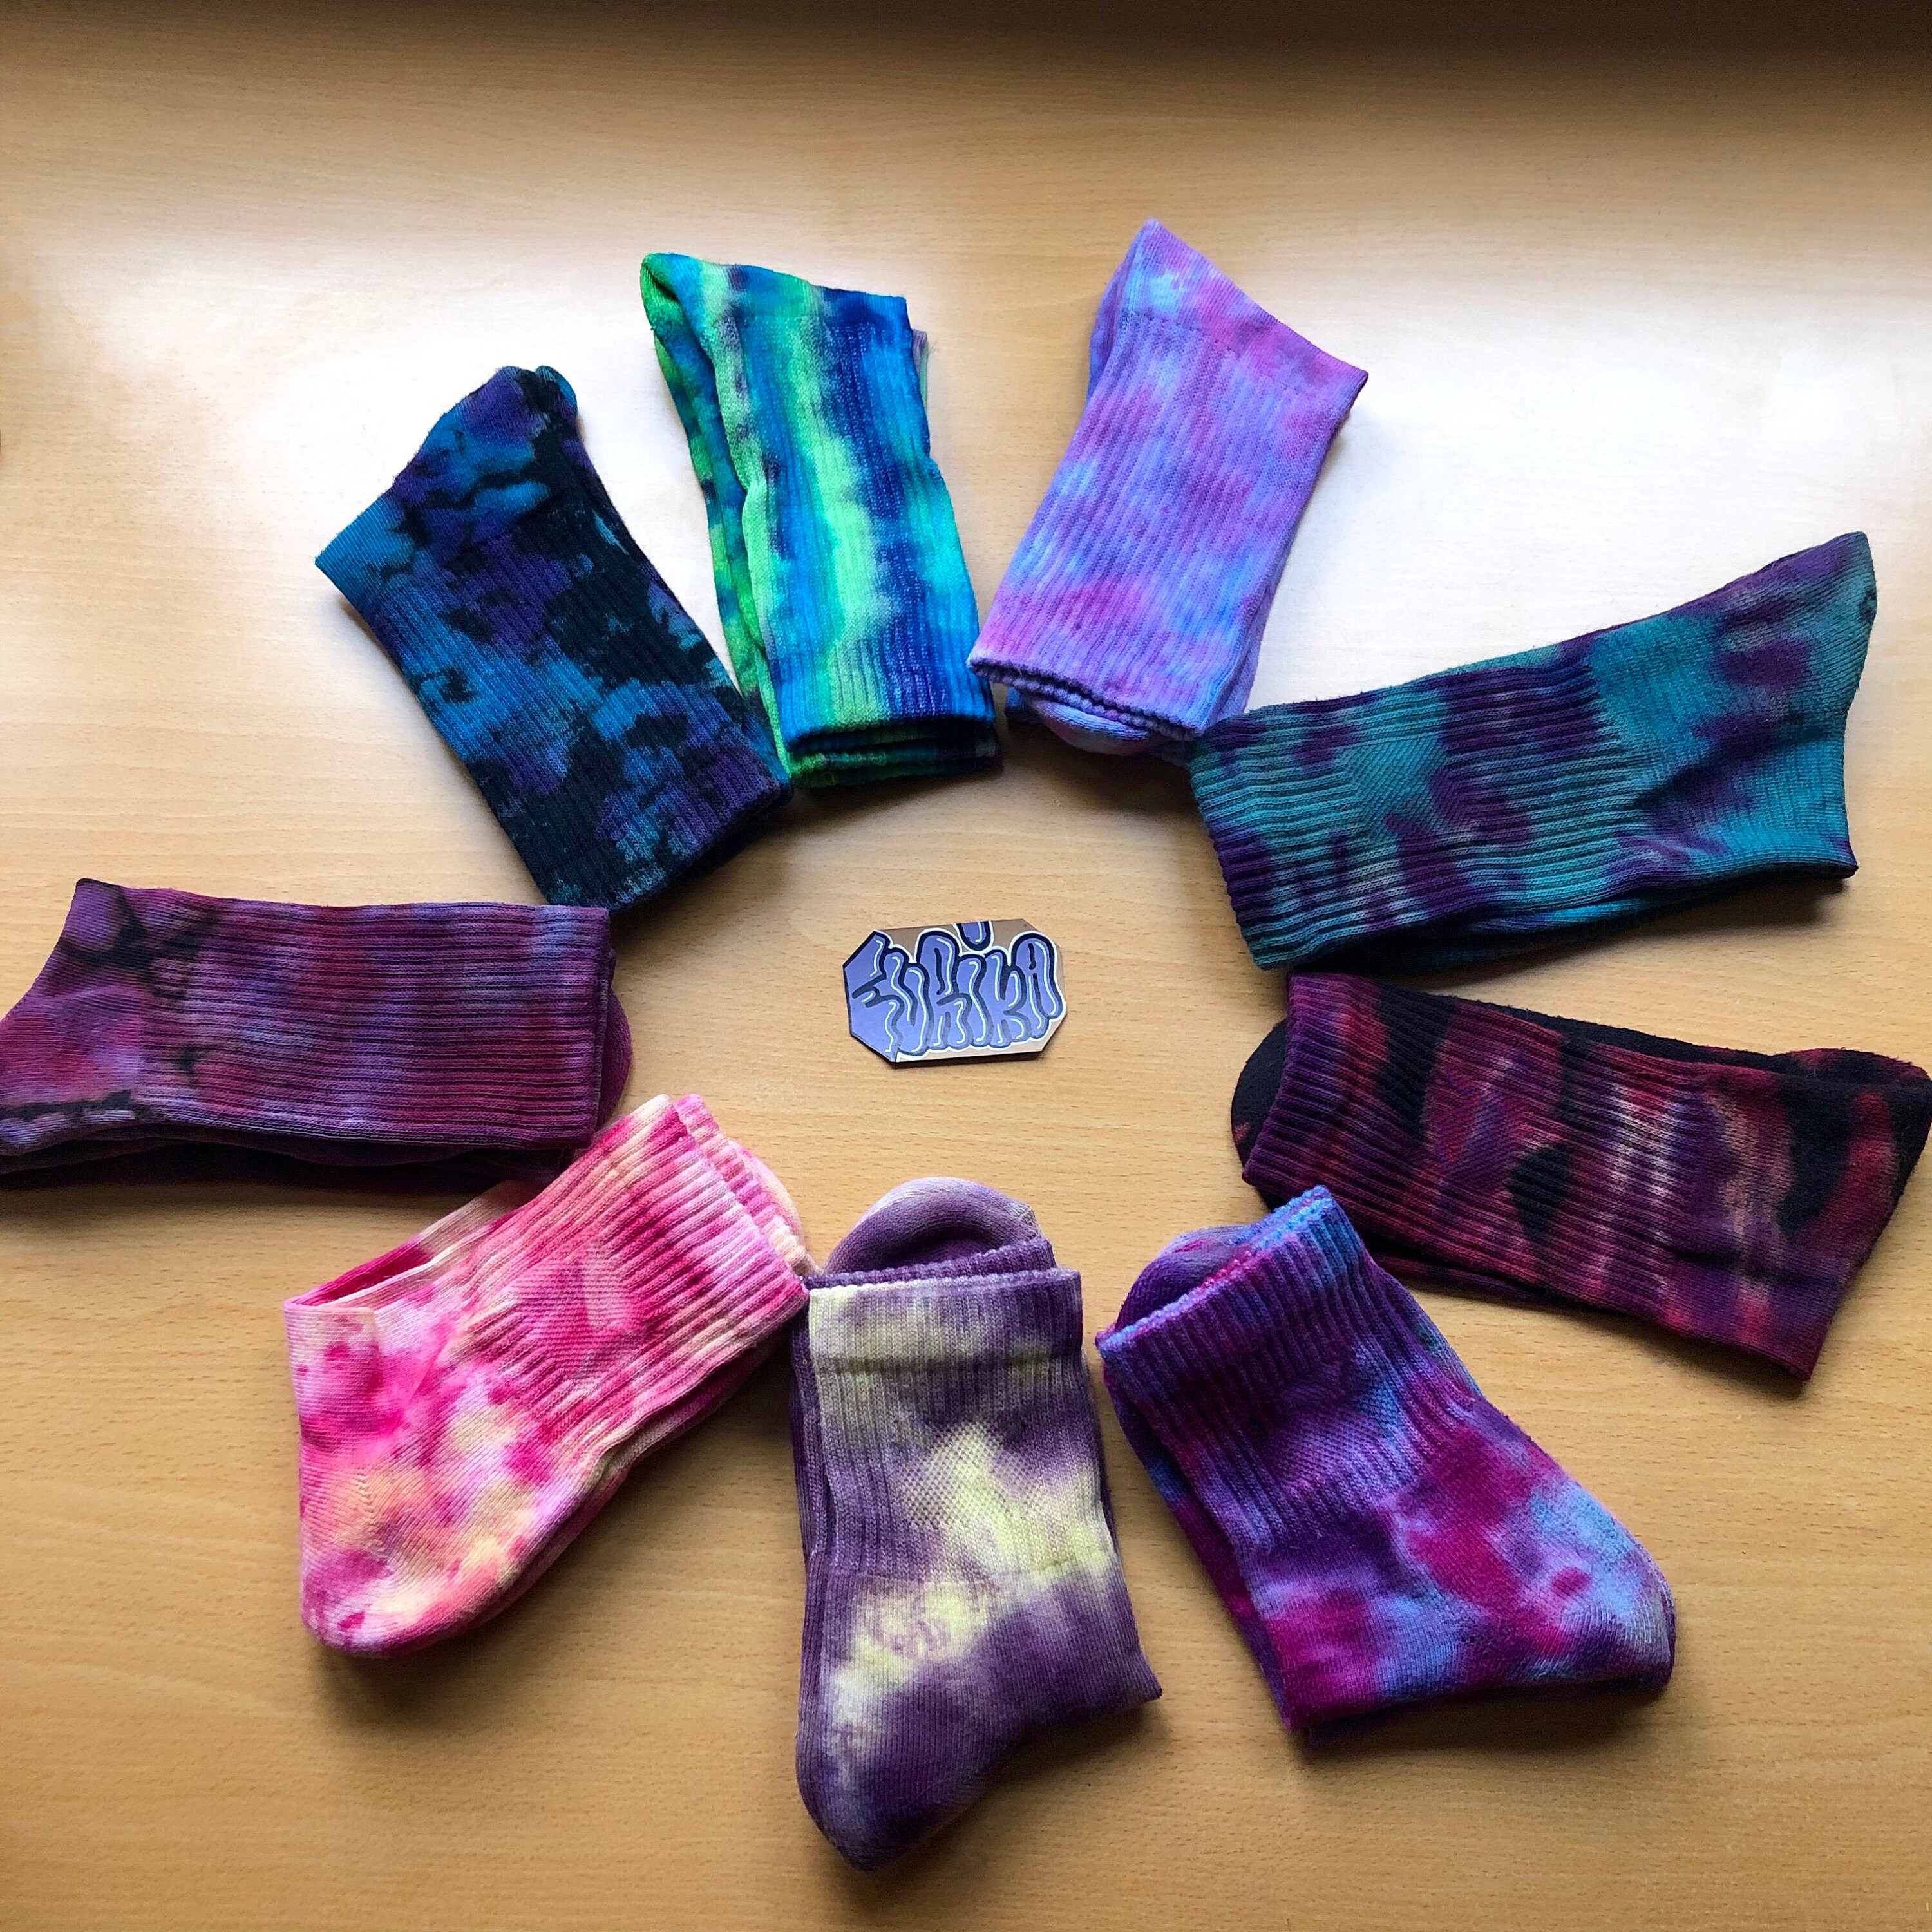 Discount for the set of 3 Unisex tie dye socks Tie dye socks Tie Dye custom crew socks Handmade tie dye socks All colors available